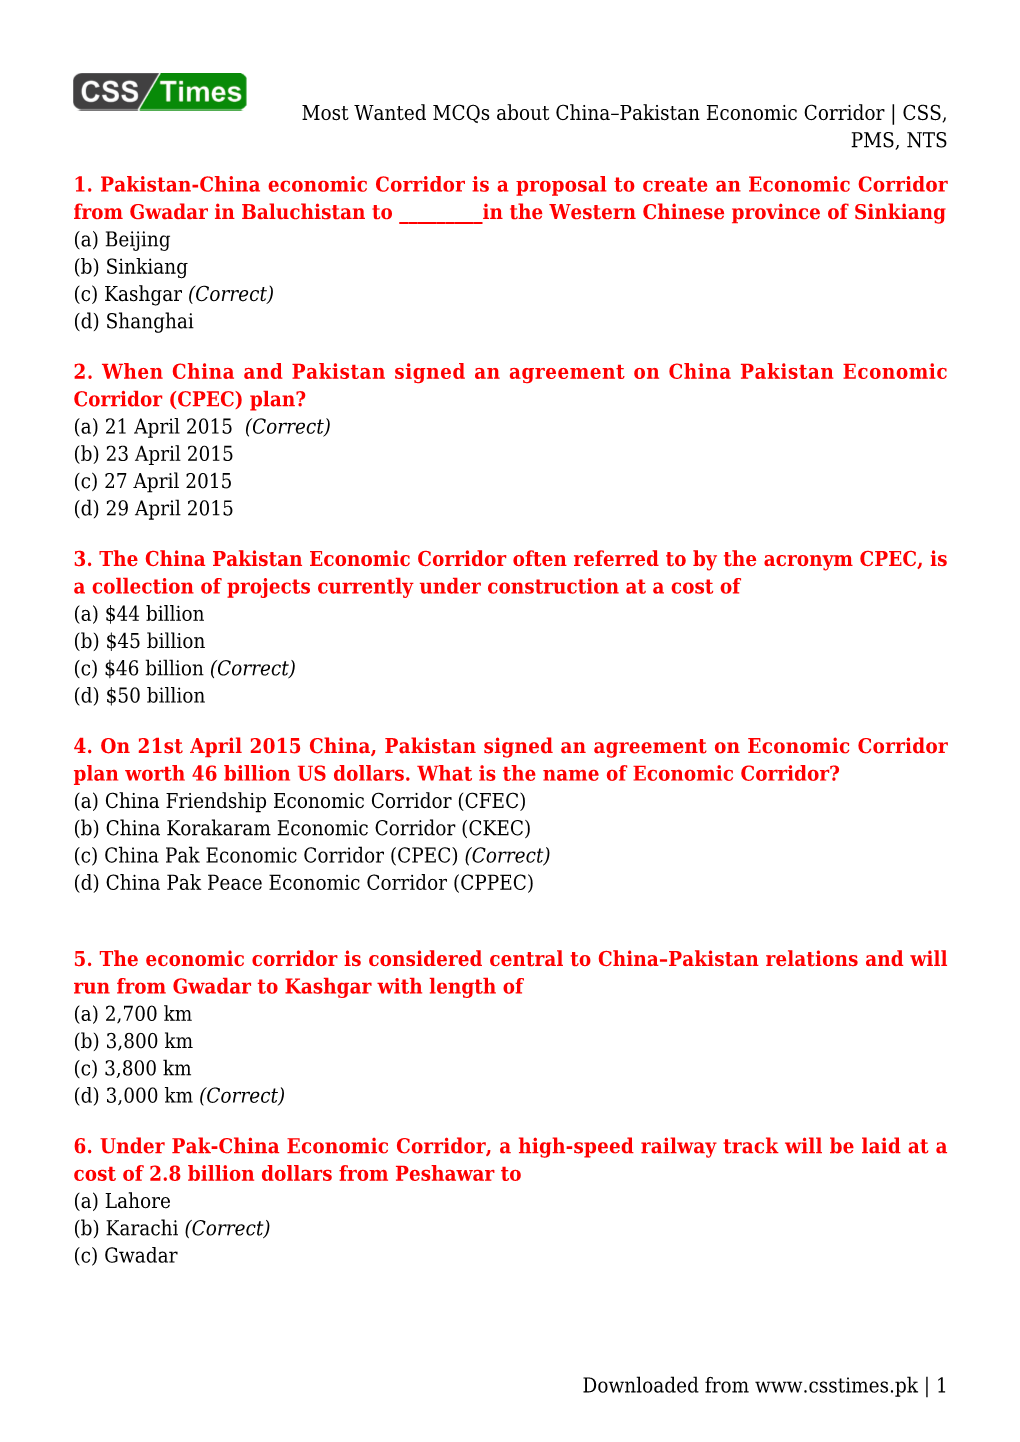 Most Wanted Mcqs About China–Pakistan Economic Corridor | CSS, PMS, NTS